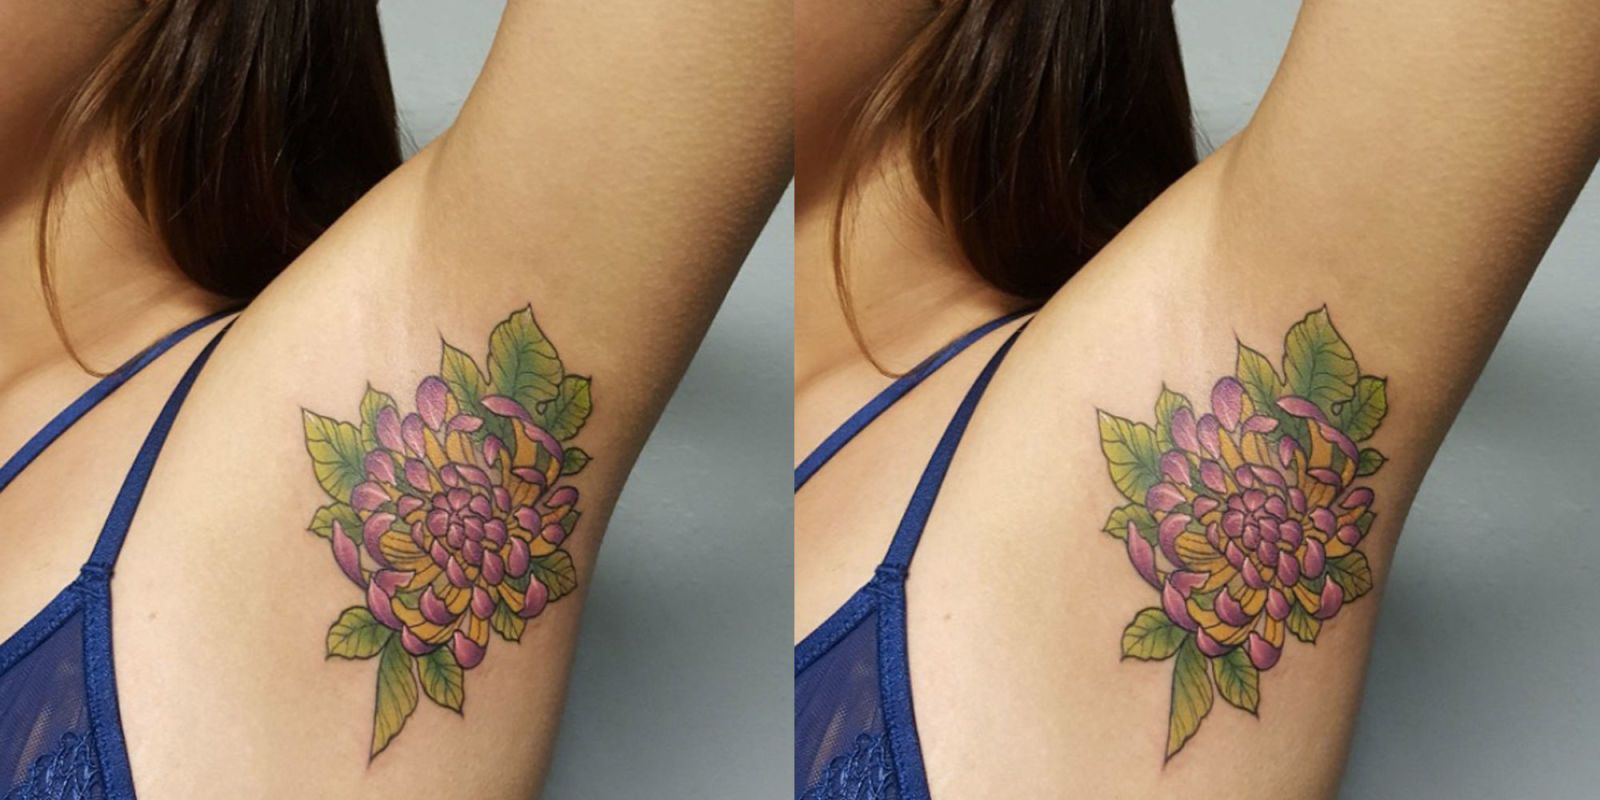 Armpit Tattoos: See Photos of the New Trend | J-14